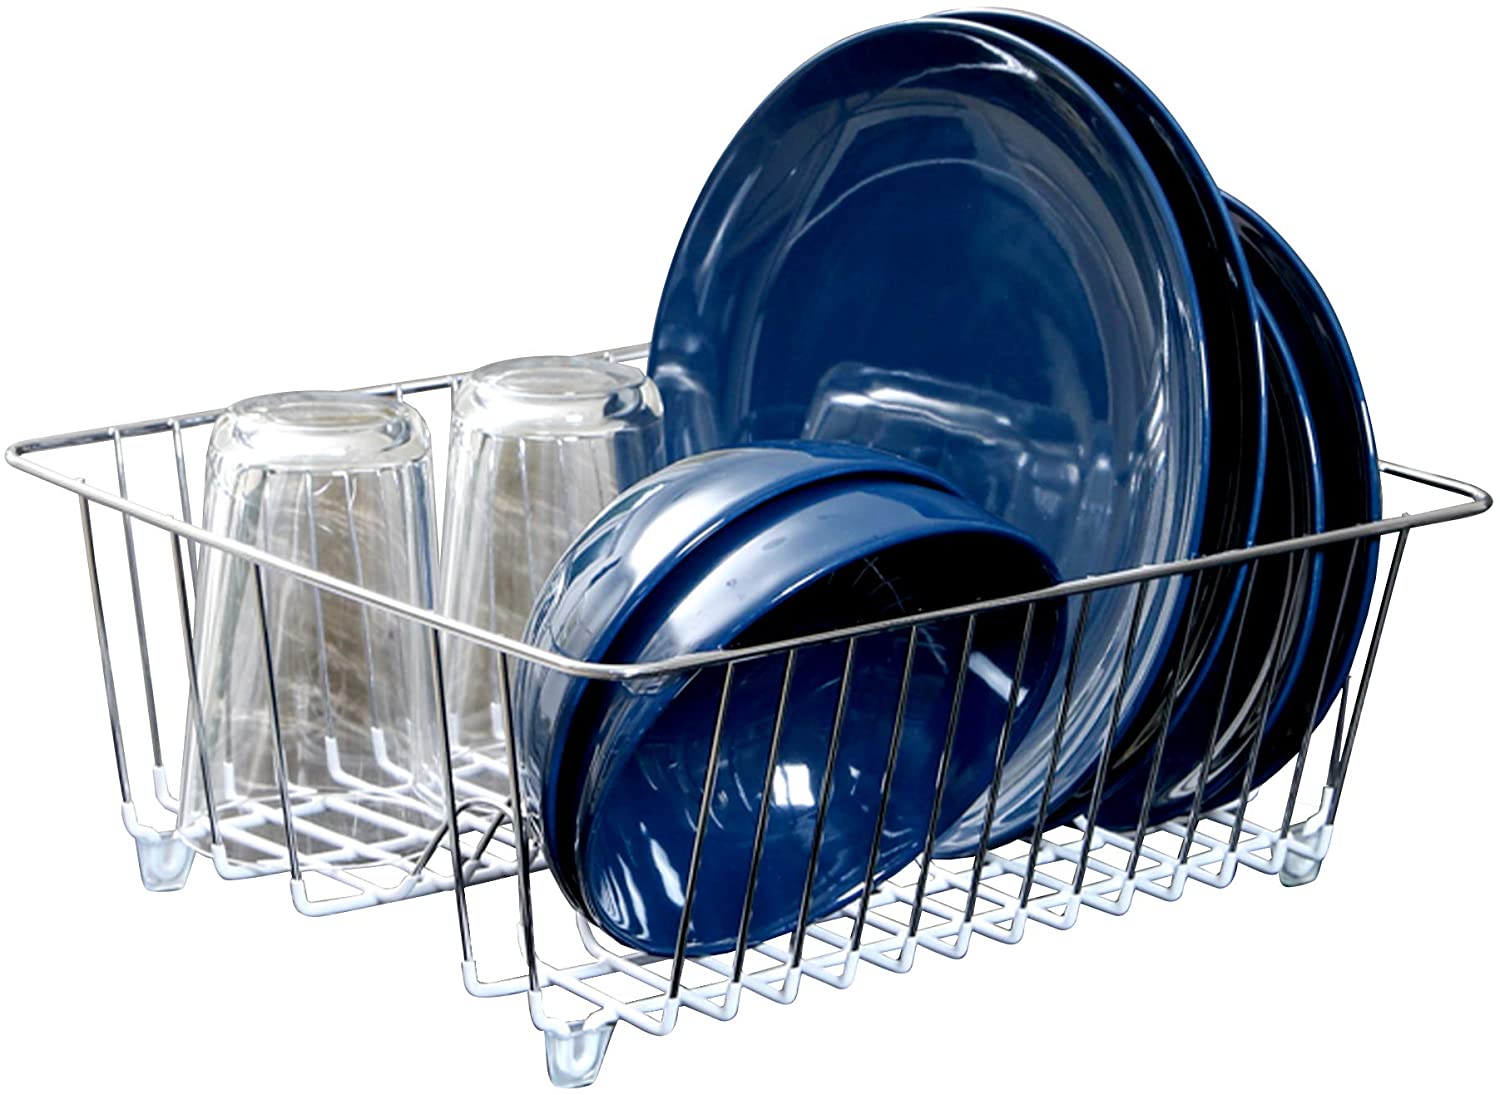 Antimicrobial Small Chrome Dish Drainer